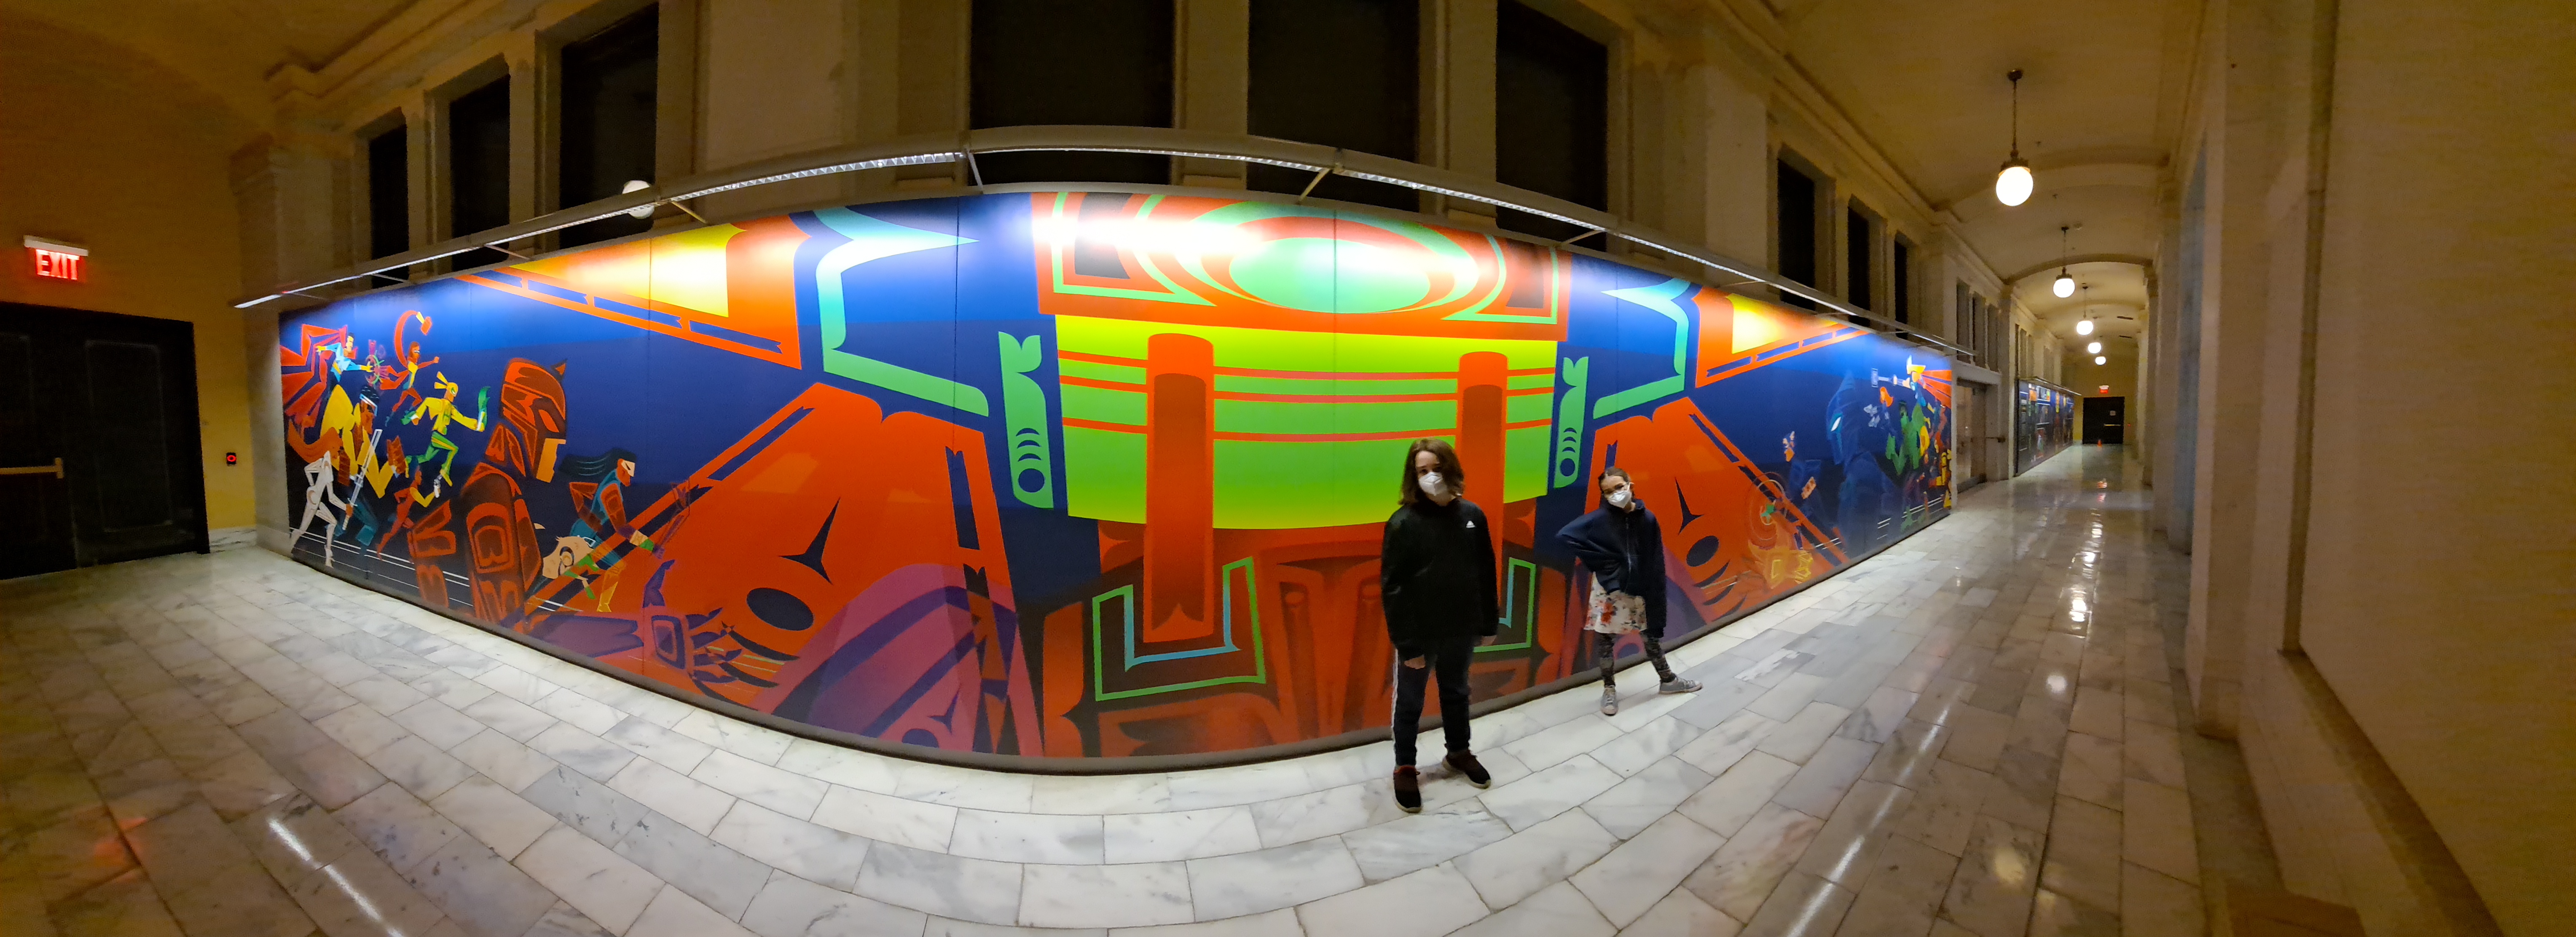 Jeffrey Veregge: Of Gods and Heroes, Mural from National Museum of the American Indian, NYC, March 2022